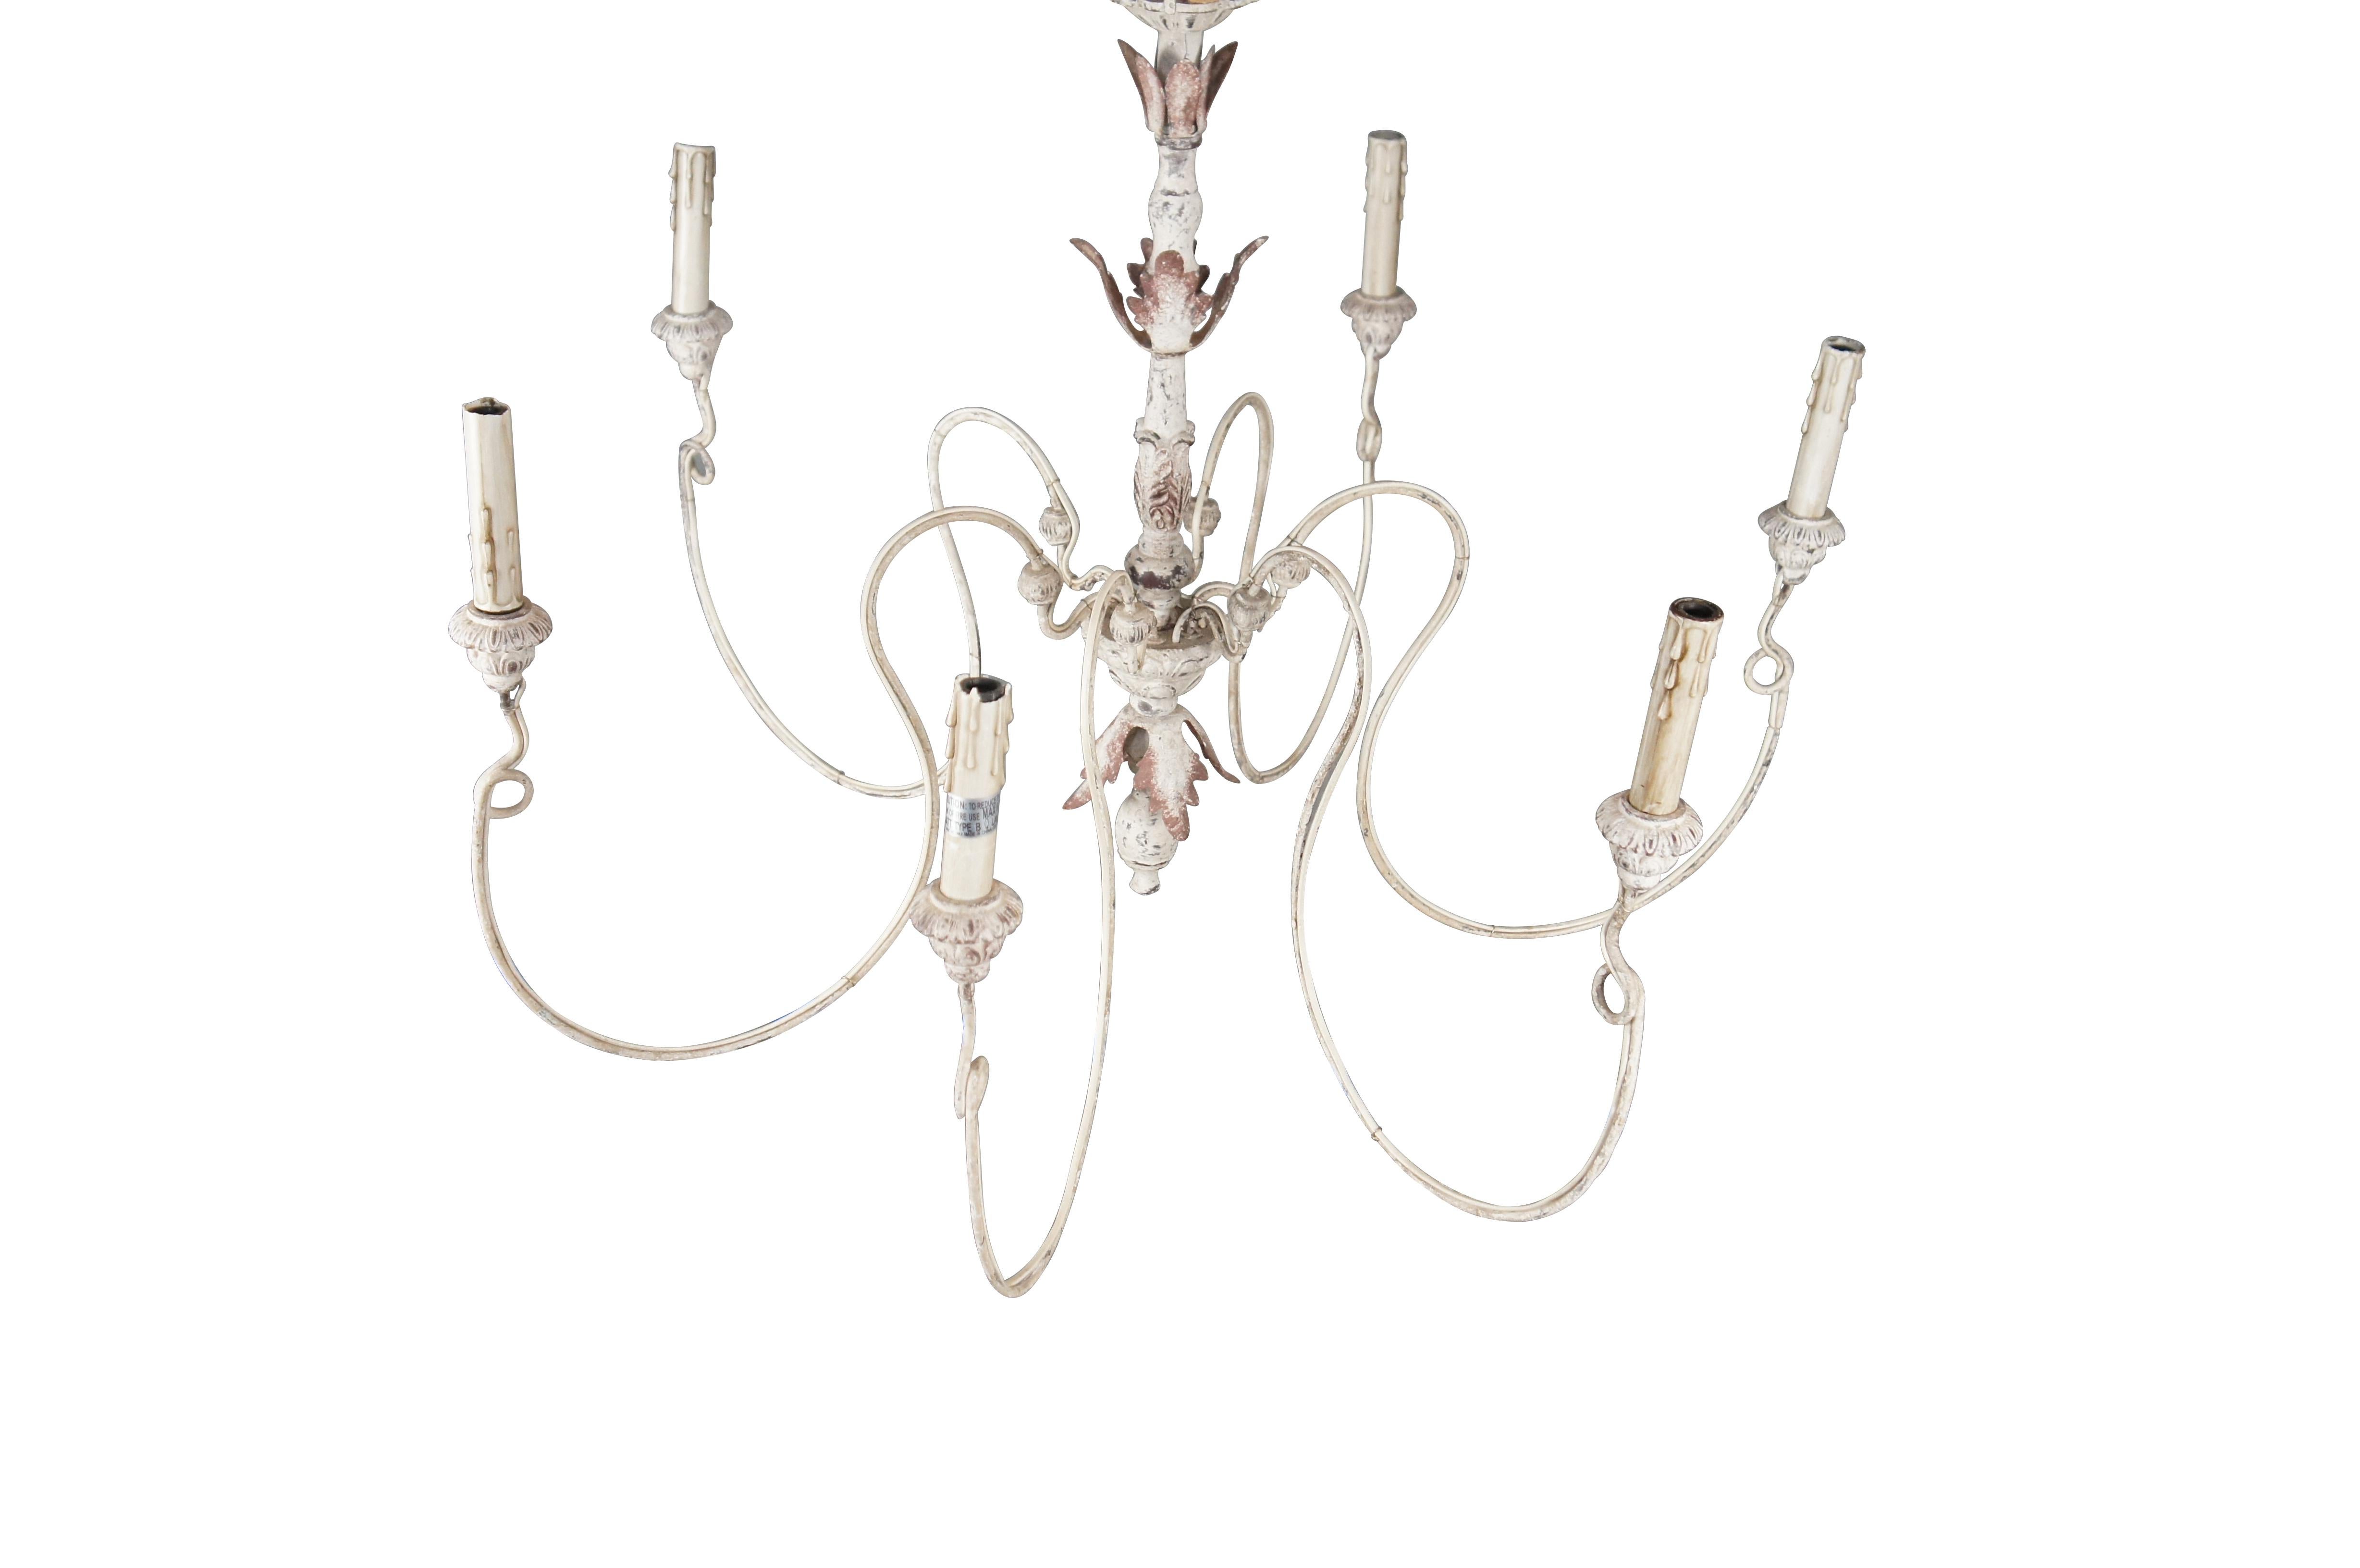 This Horchow Farmhouse Chandelier showcases a fine French Country styling and offers an elegant lighting addition to the dining room, living room, or foyer. Crafted with a painted, central wooden column, this decadent chandelier features curvaceous